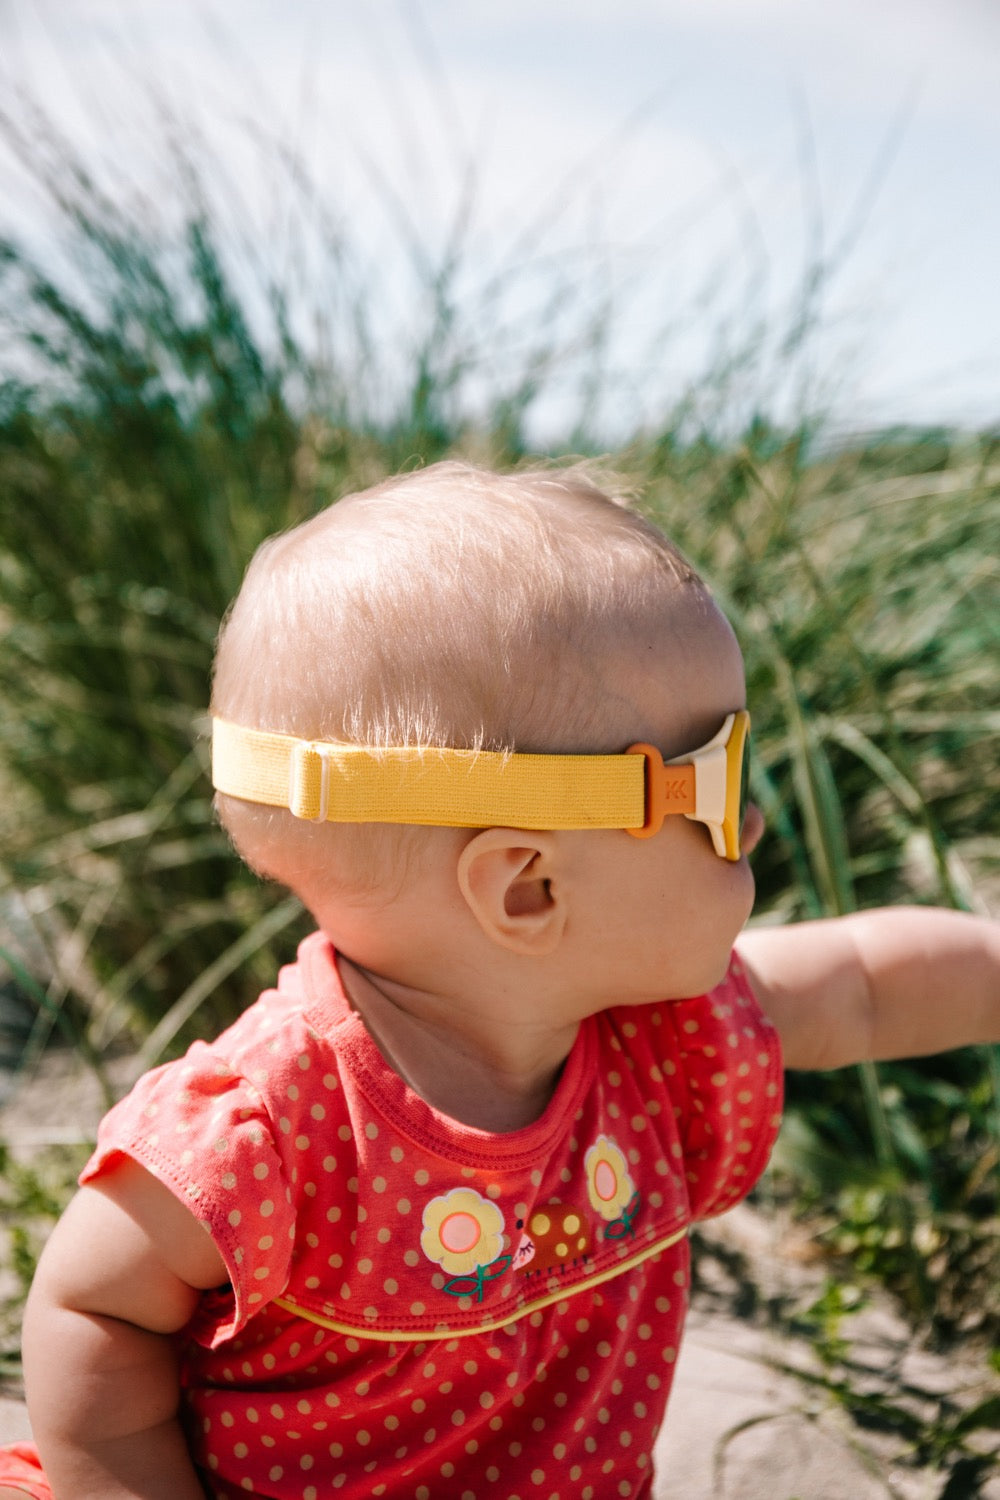 Baby uses Click & Change sunglasses with a headband.